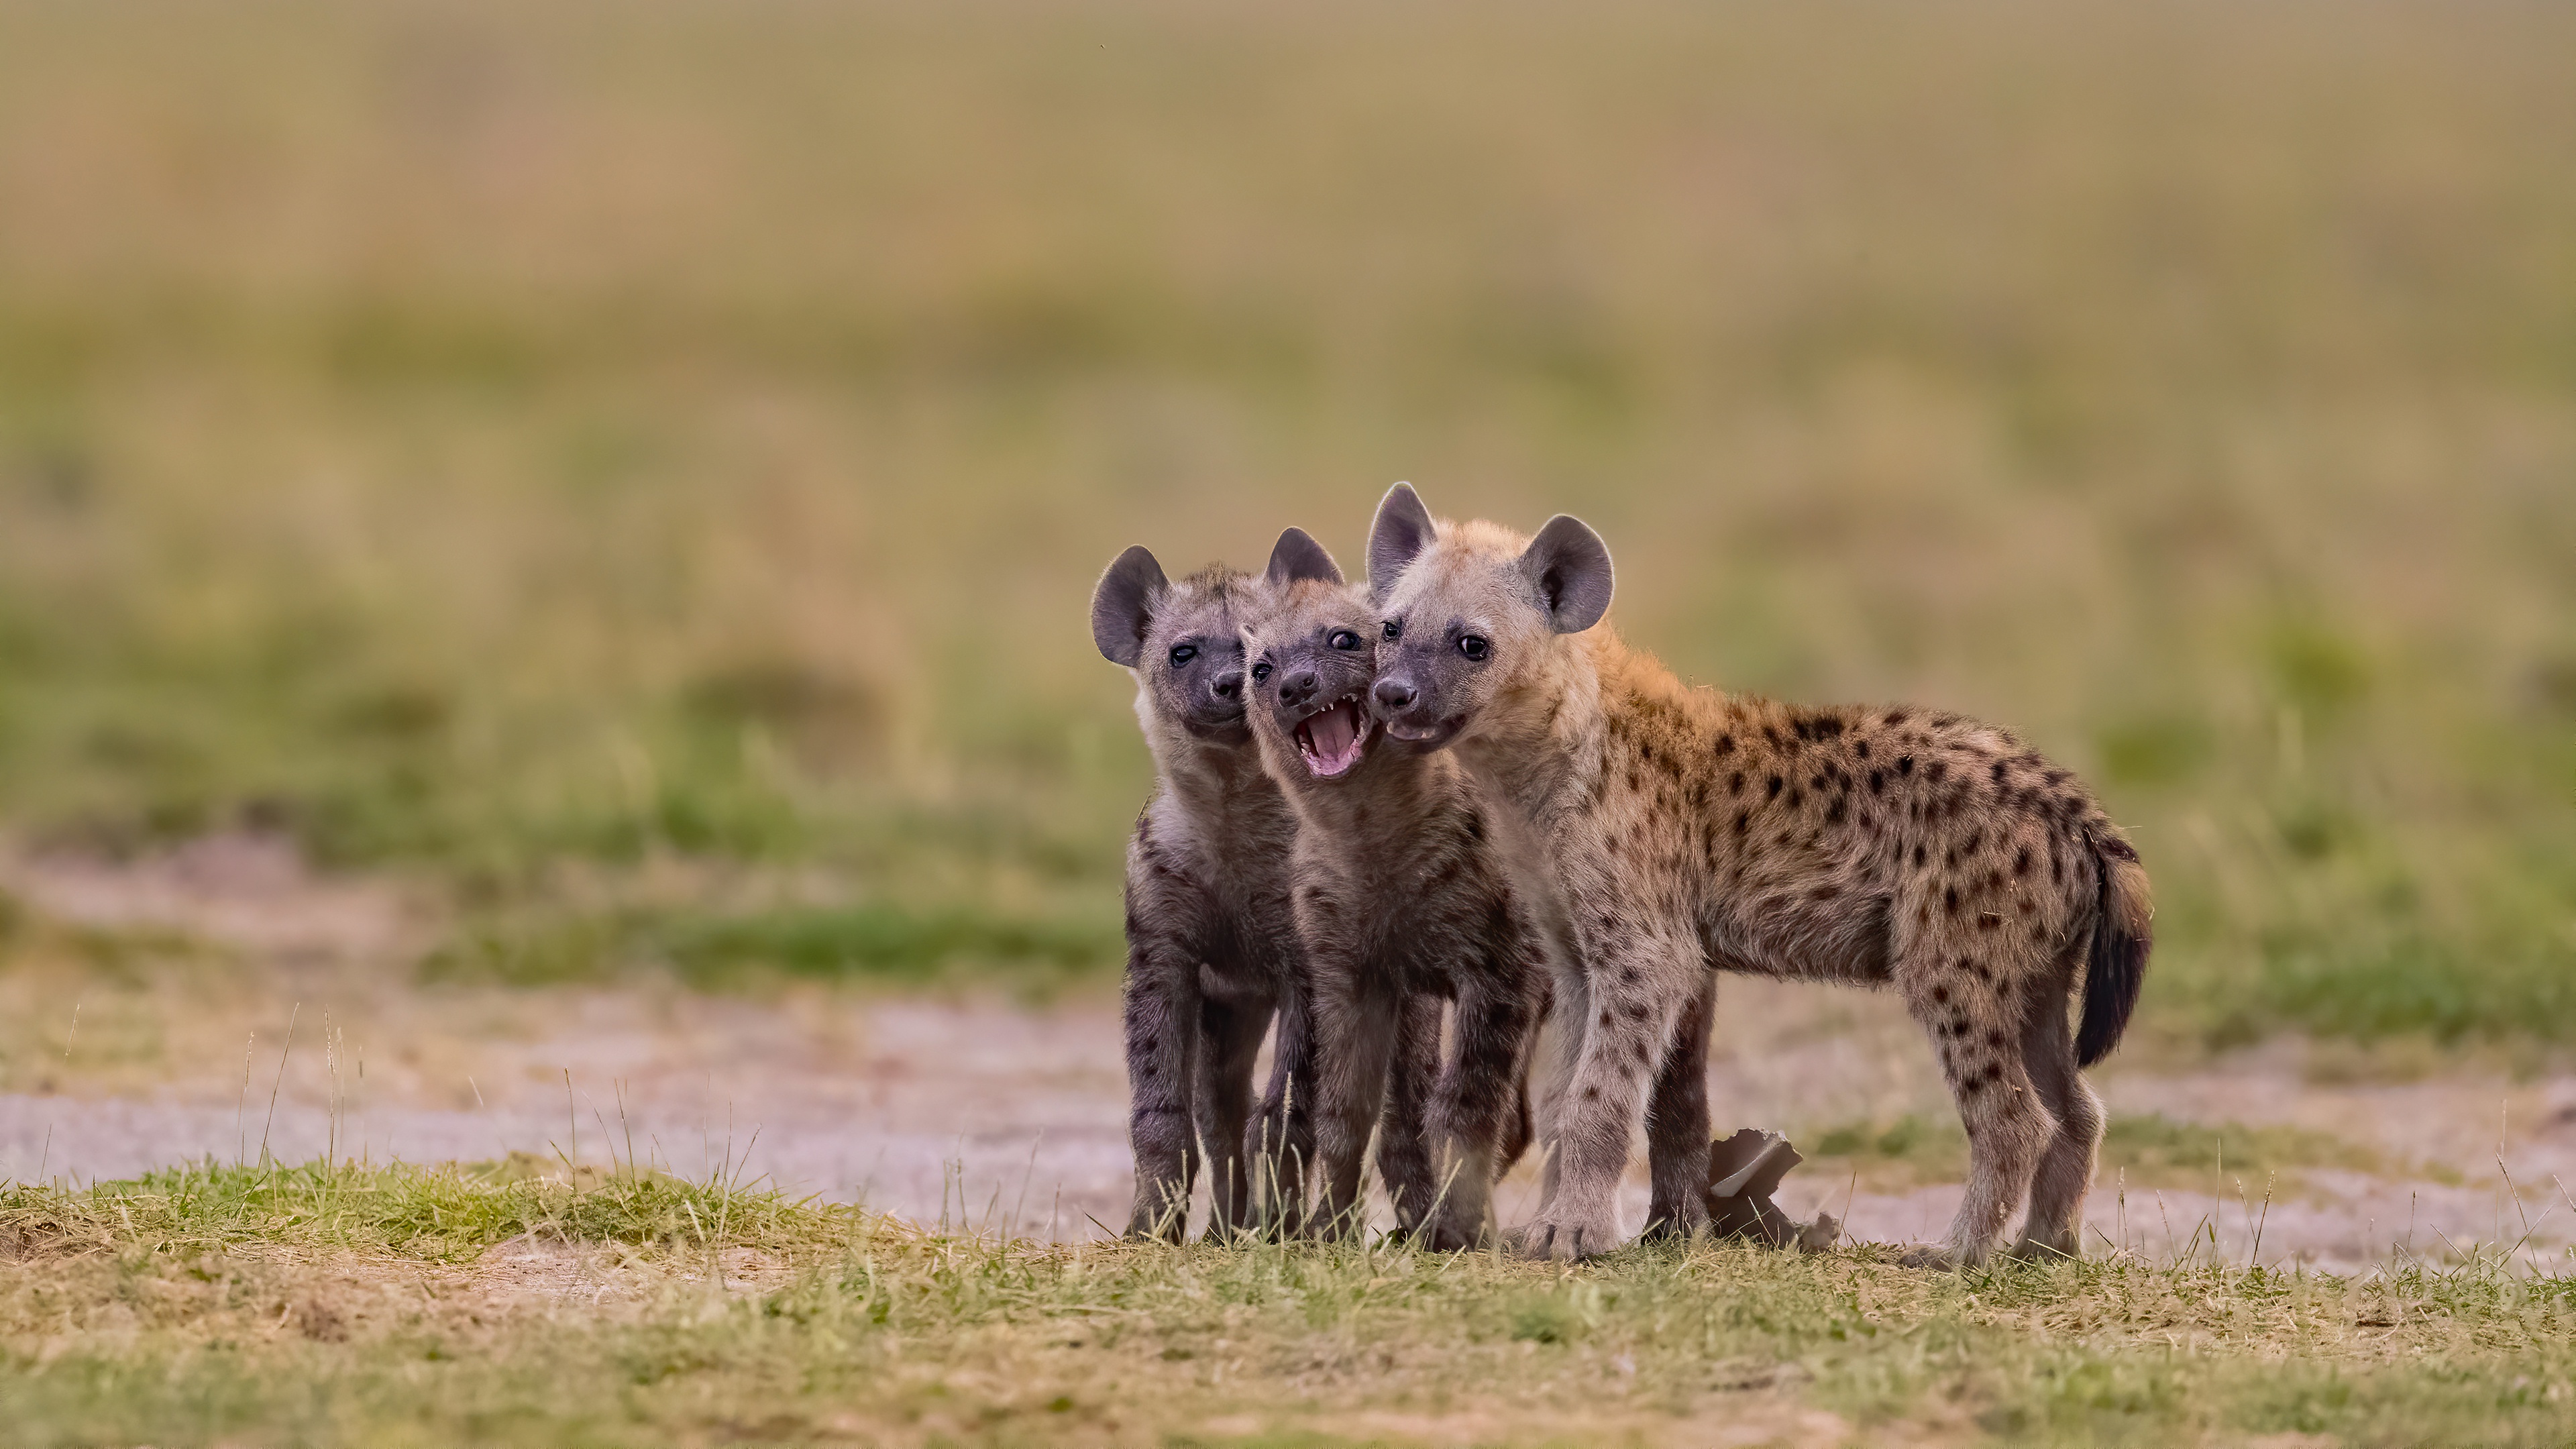 Group of young Hyenas 4k Ultra HD Wallpaper Background Image 3840x2160